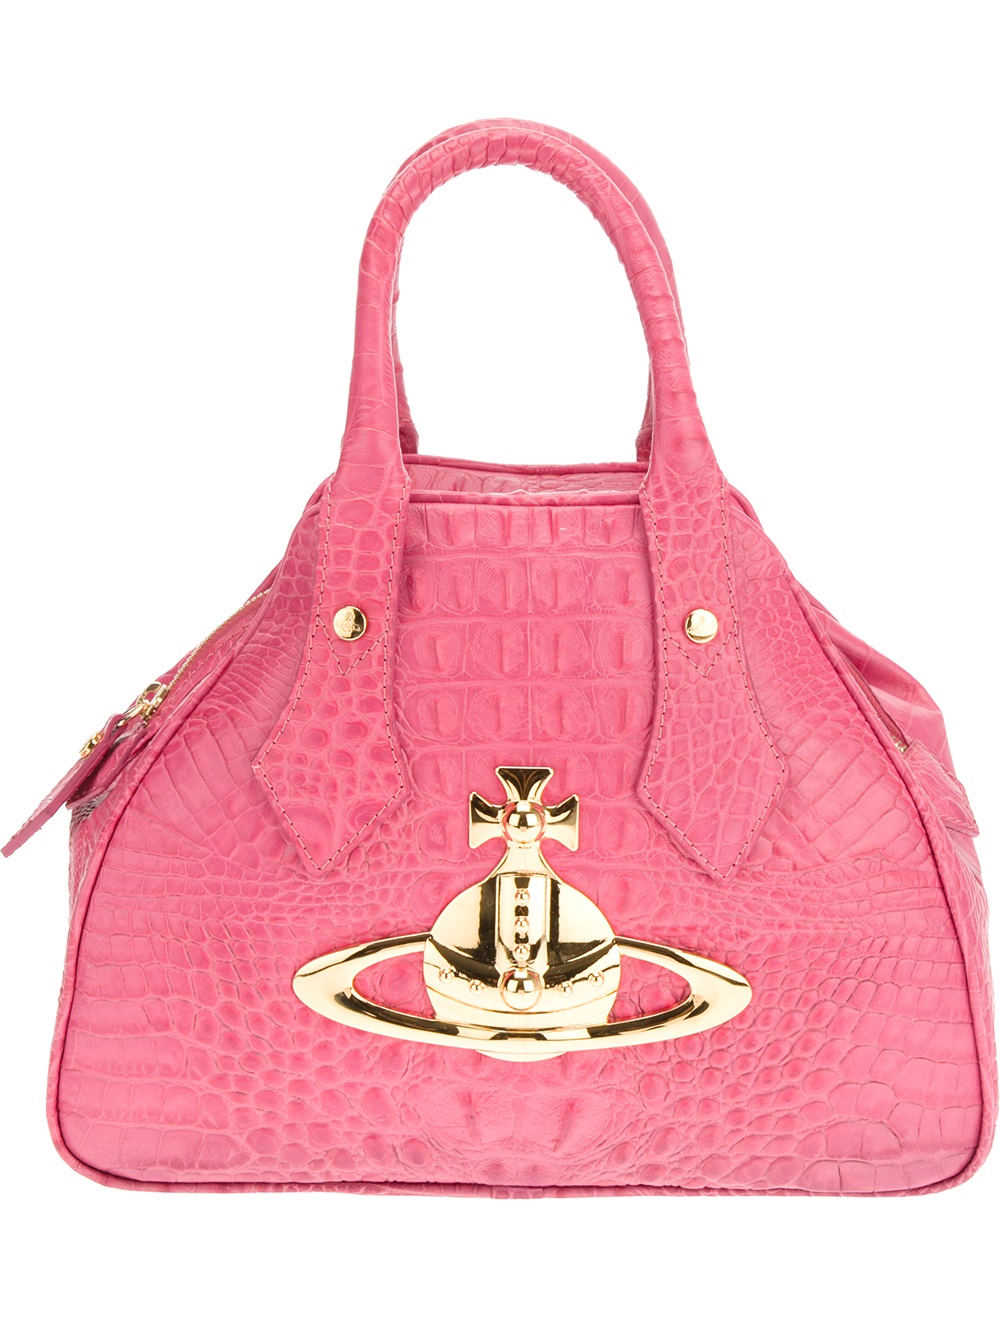 Vivienne Westwood New Chancery Heart Bag in Pink